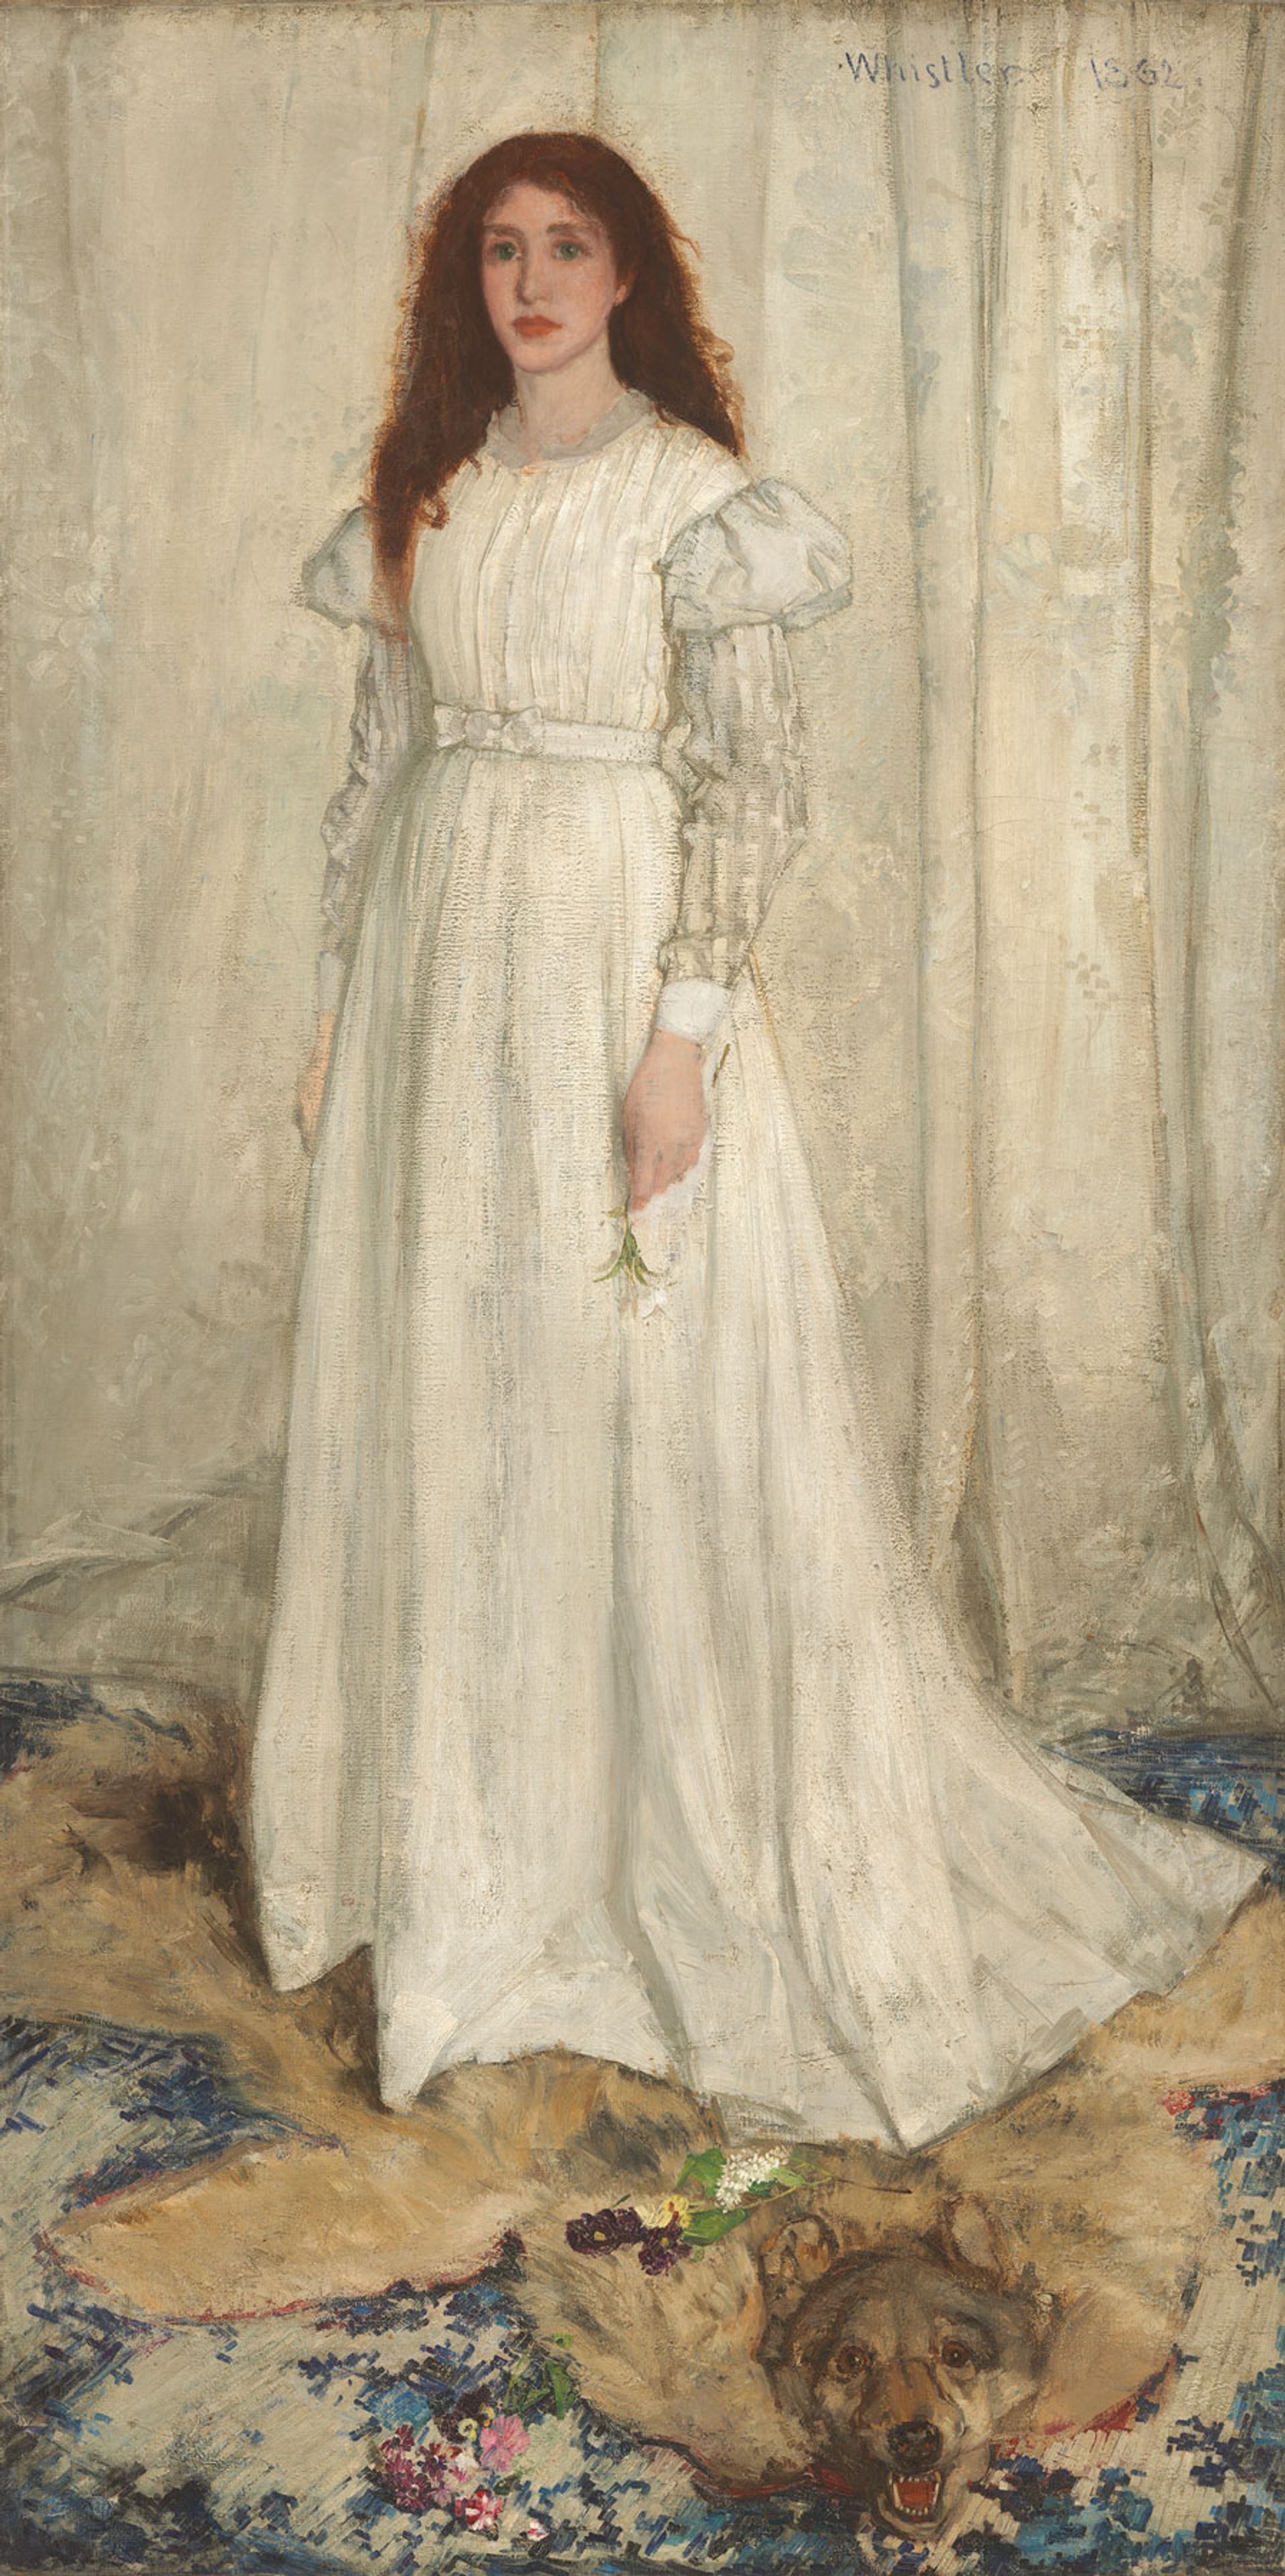 James Abbott McNeill Whistler's Symphony in White, No. 1: The White Girl (1862) National Gallery of Art, Washington, Harris Whittemore Collection